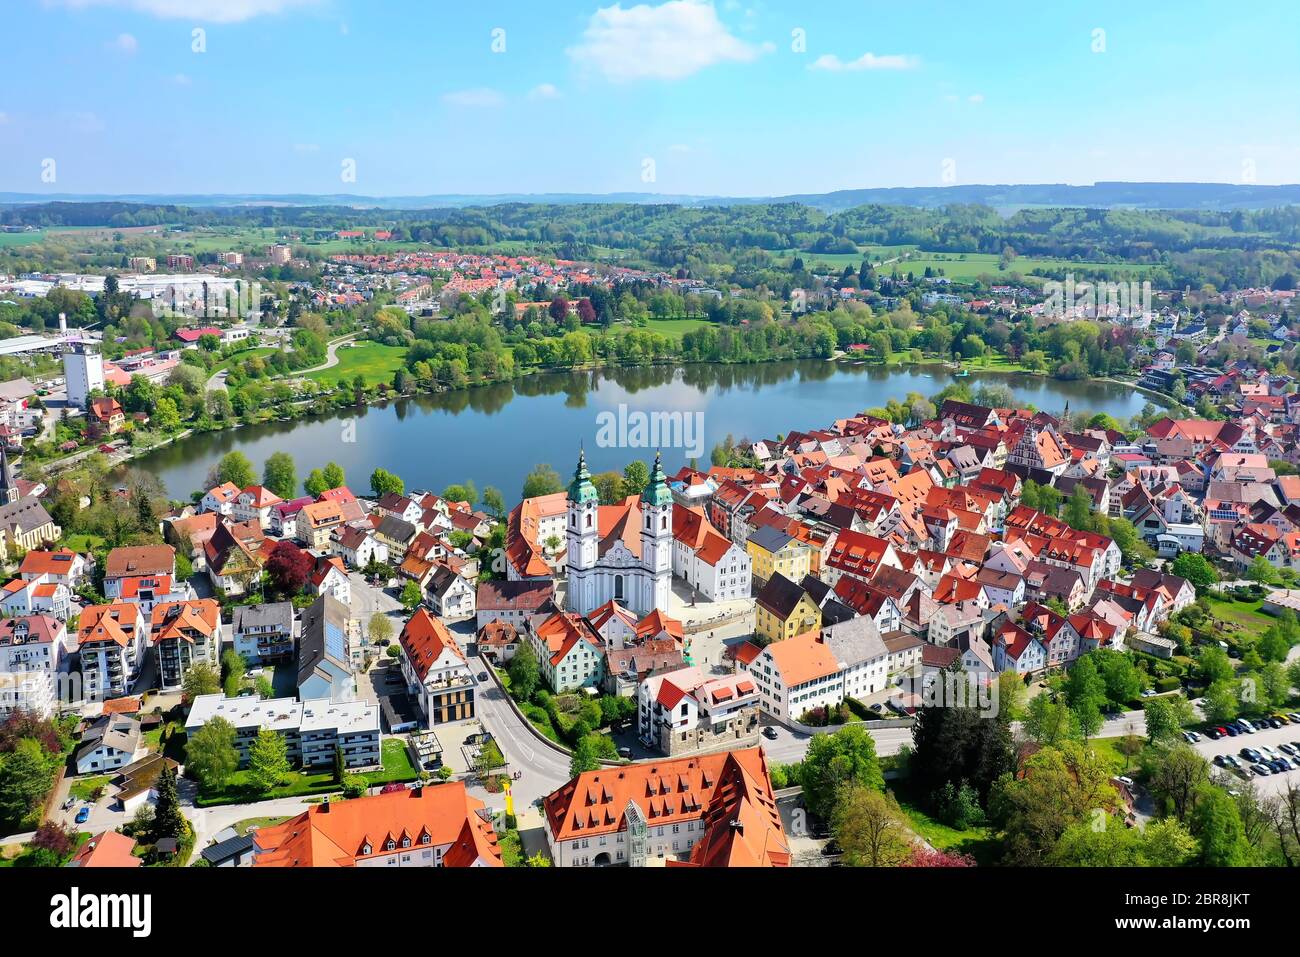 Bad Waldsee a city in Germany Stock Photo - Alamy